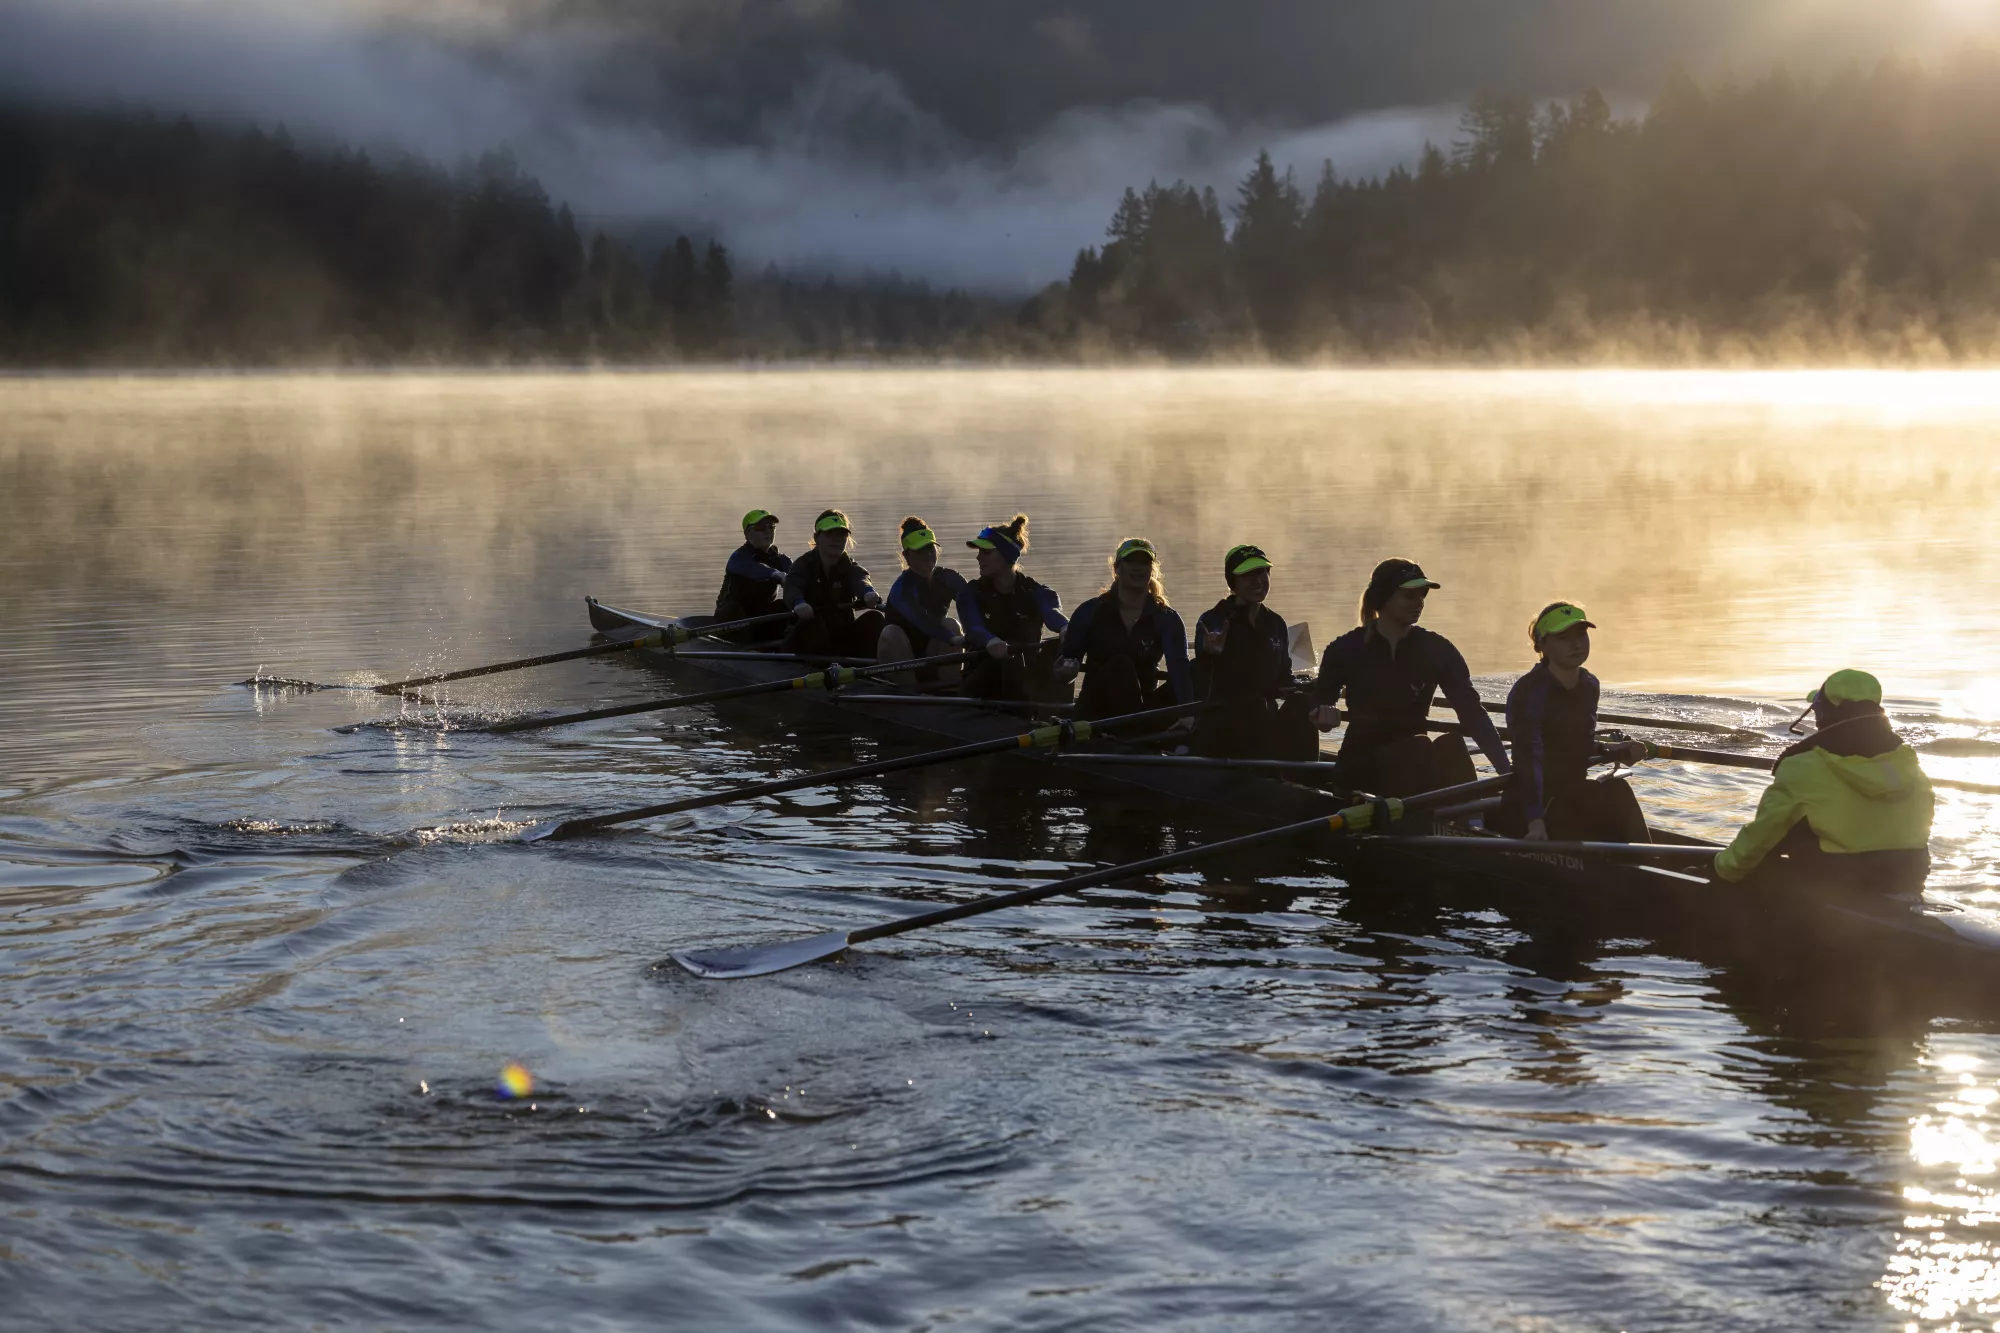 Members of the WWU rowing team row a boat across a misty lake with trees on the horizon.